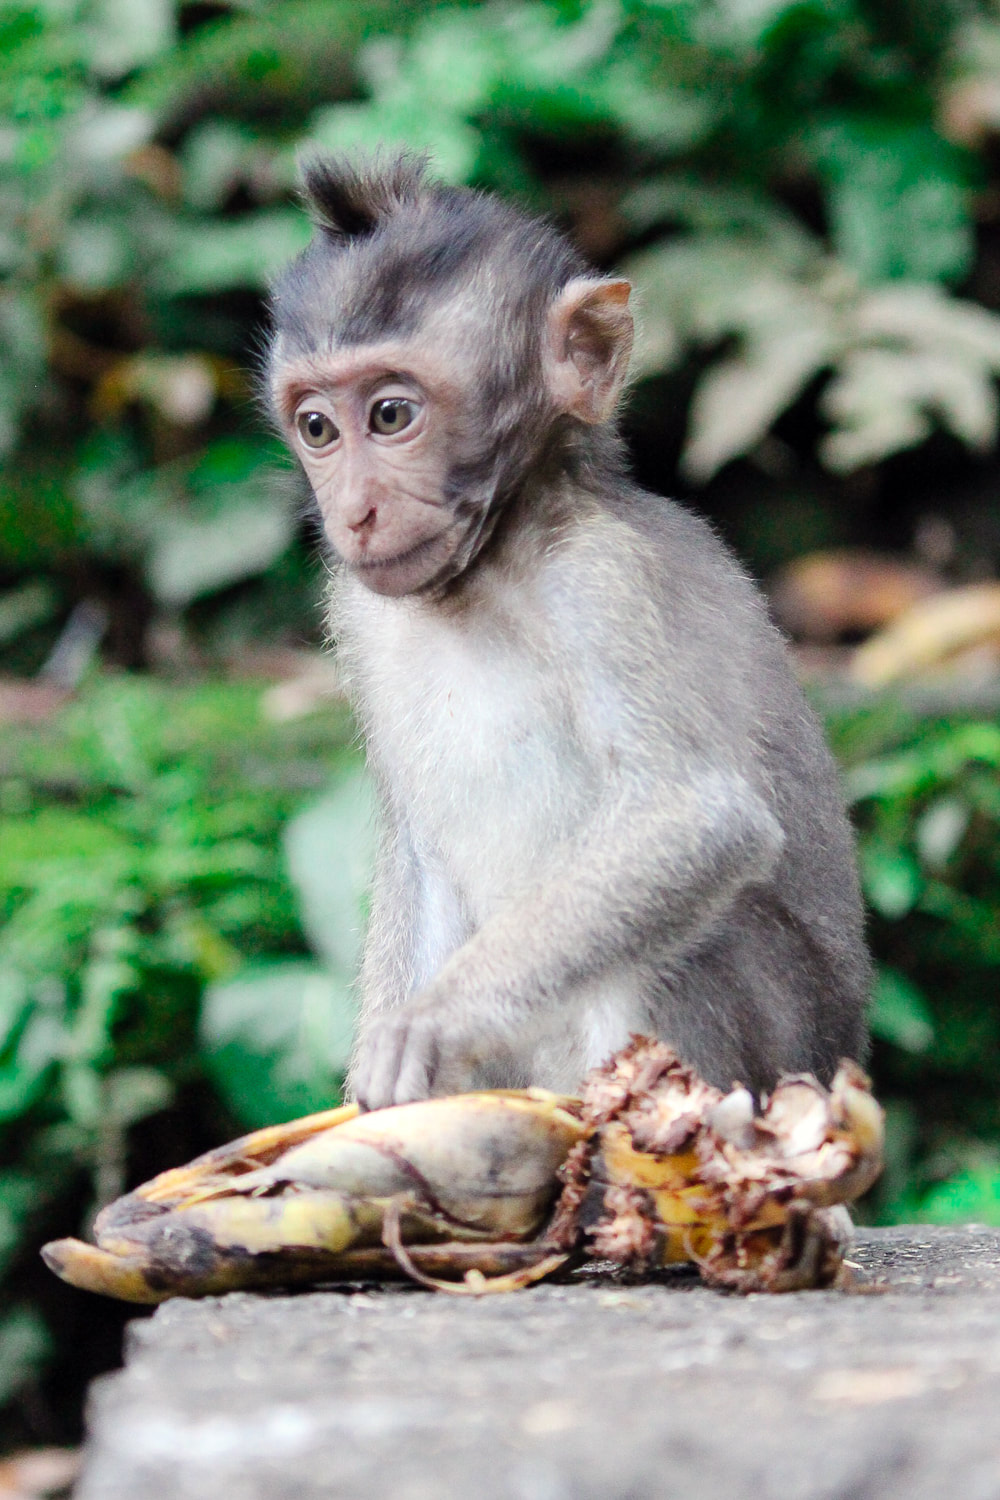 A baby Grey-haired, long-tail, macaque. Dinner time (Bananas) at the Sacred Monkey Forest Sanctuary, Ubud, Bali, Indonesia.